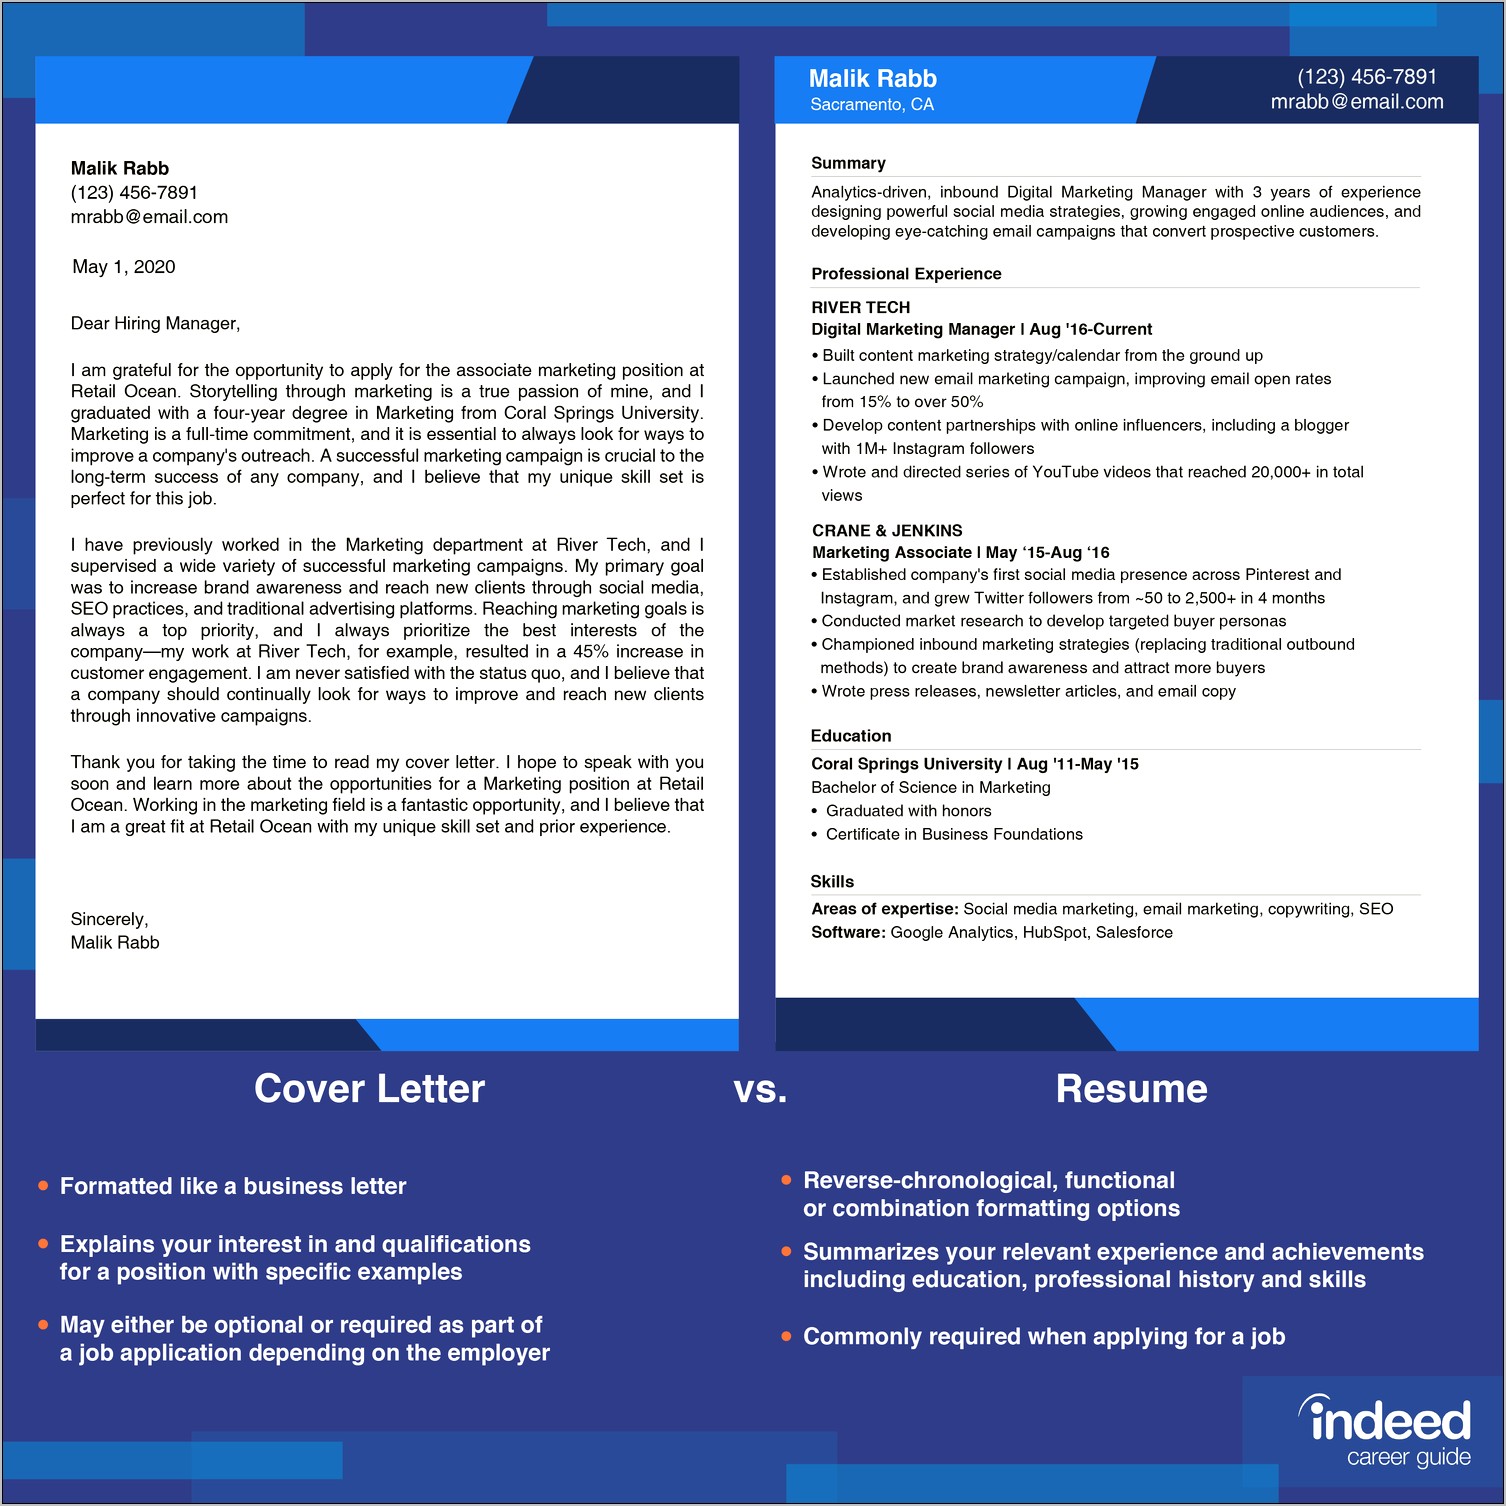 Resume And Cover Letter In One Document